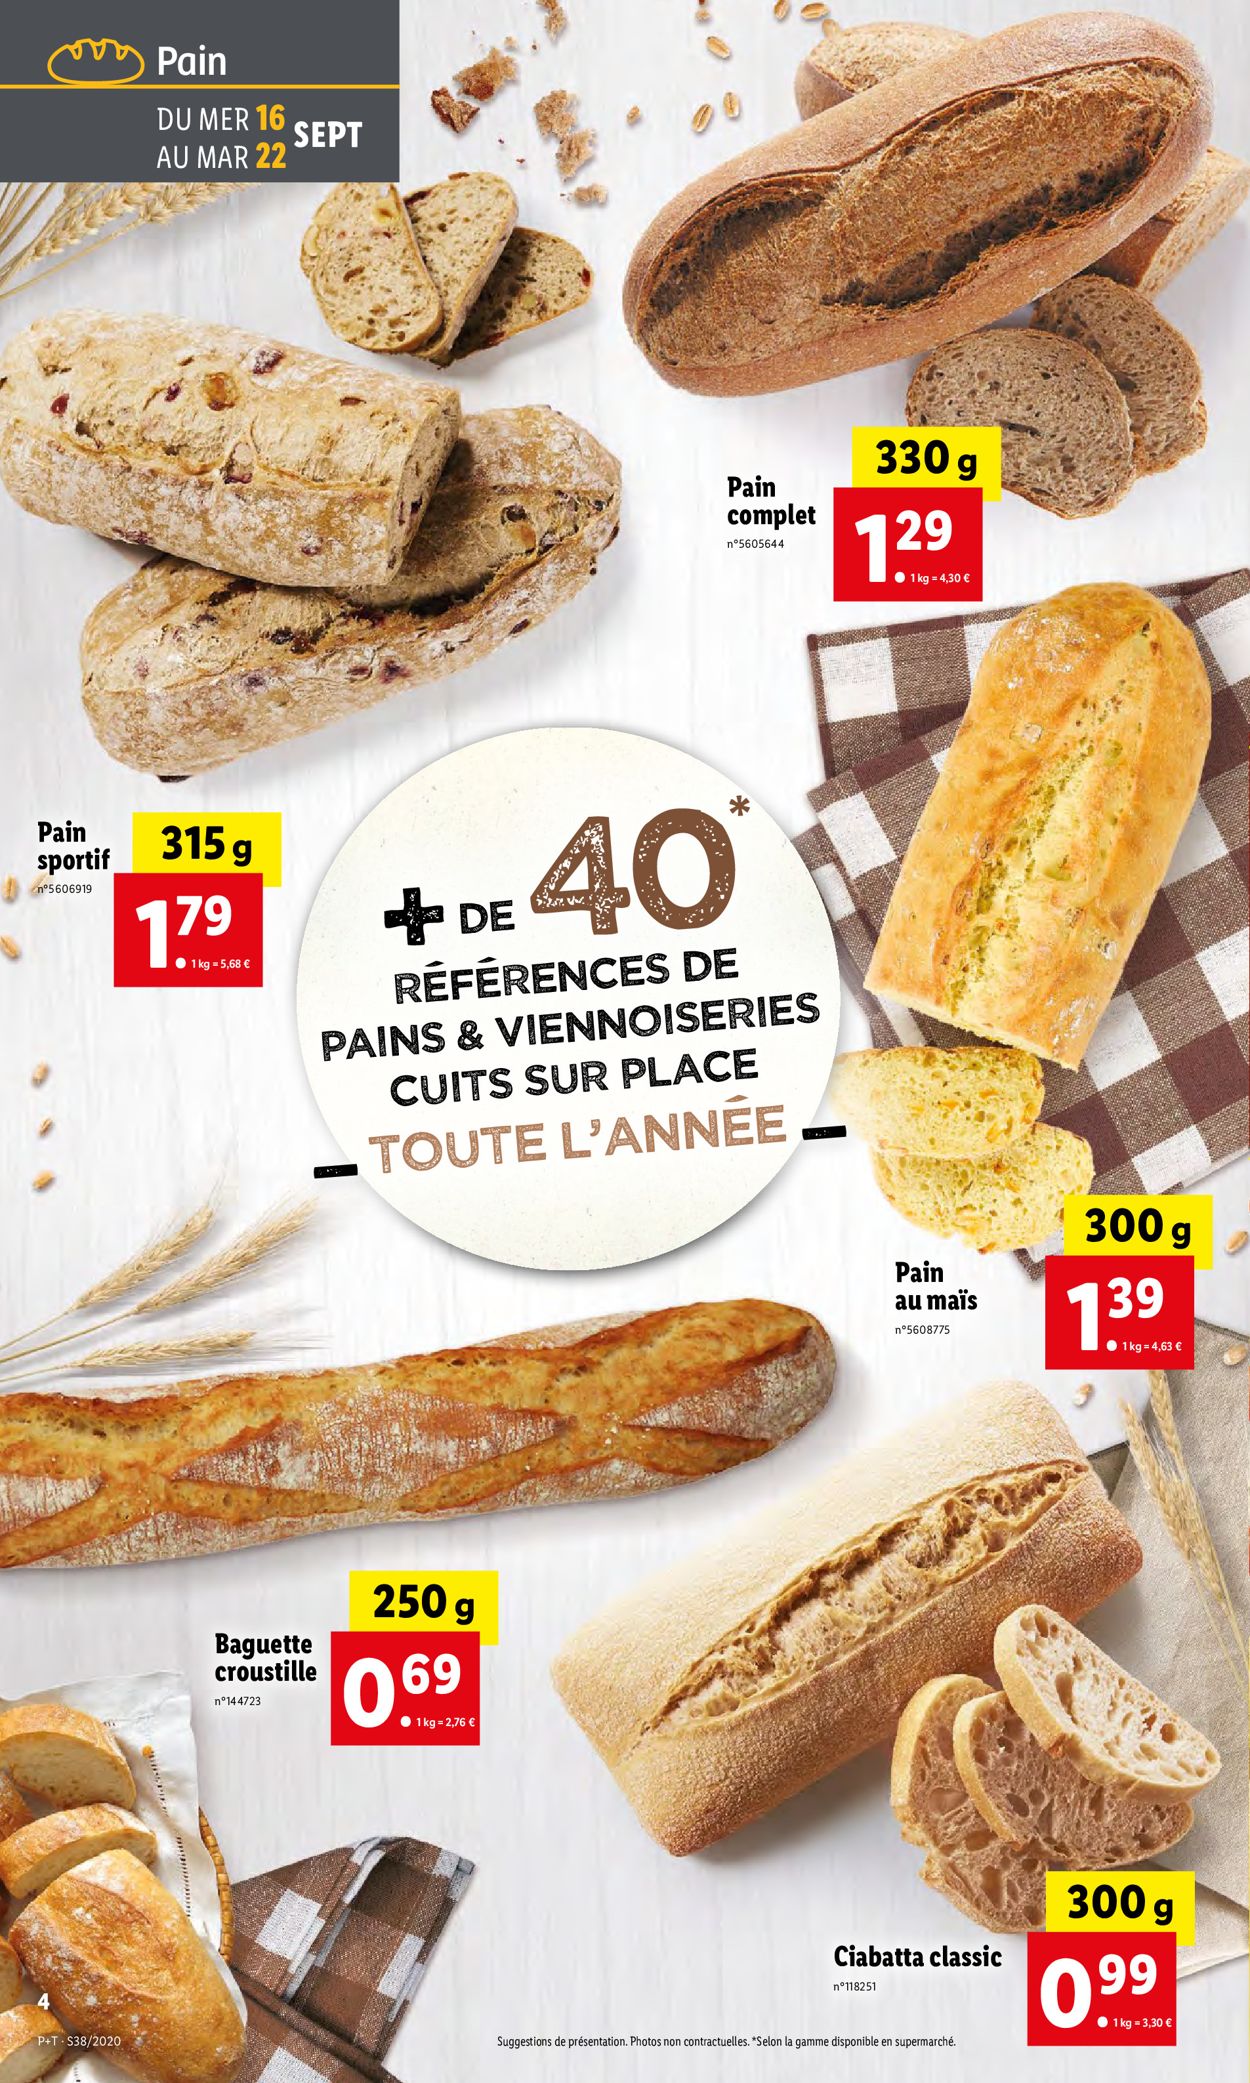 Lidl Catalogue - 16.09-22.09.2020 (Page 4)